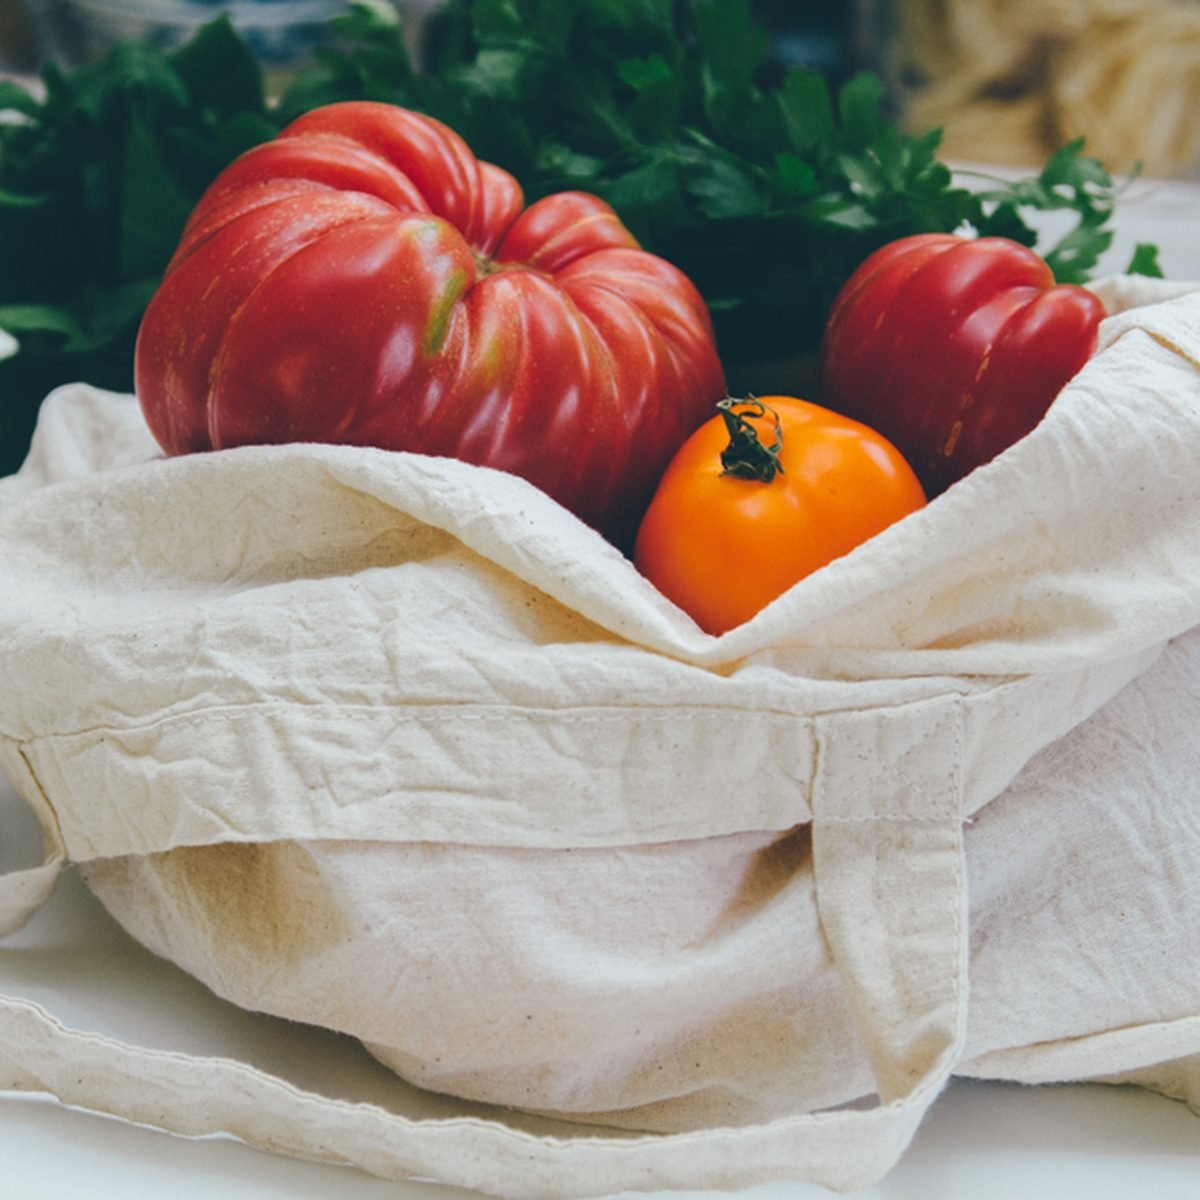 Reusable canvas grocery bag with red and yellow tomatoes and spinach.